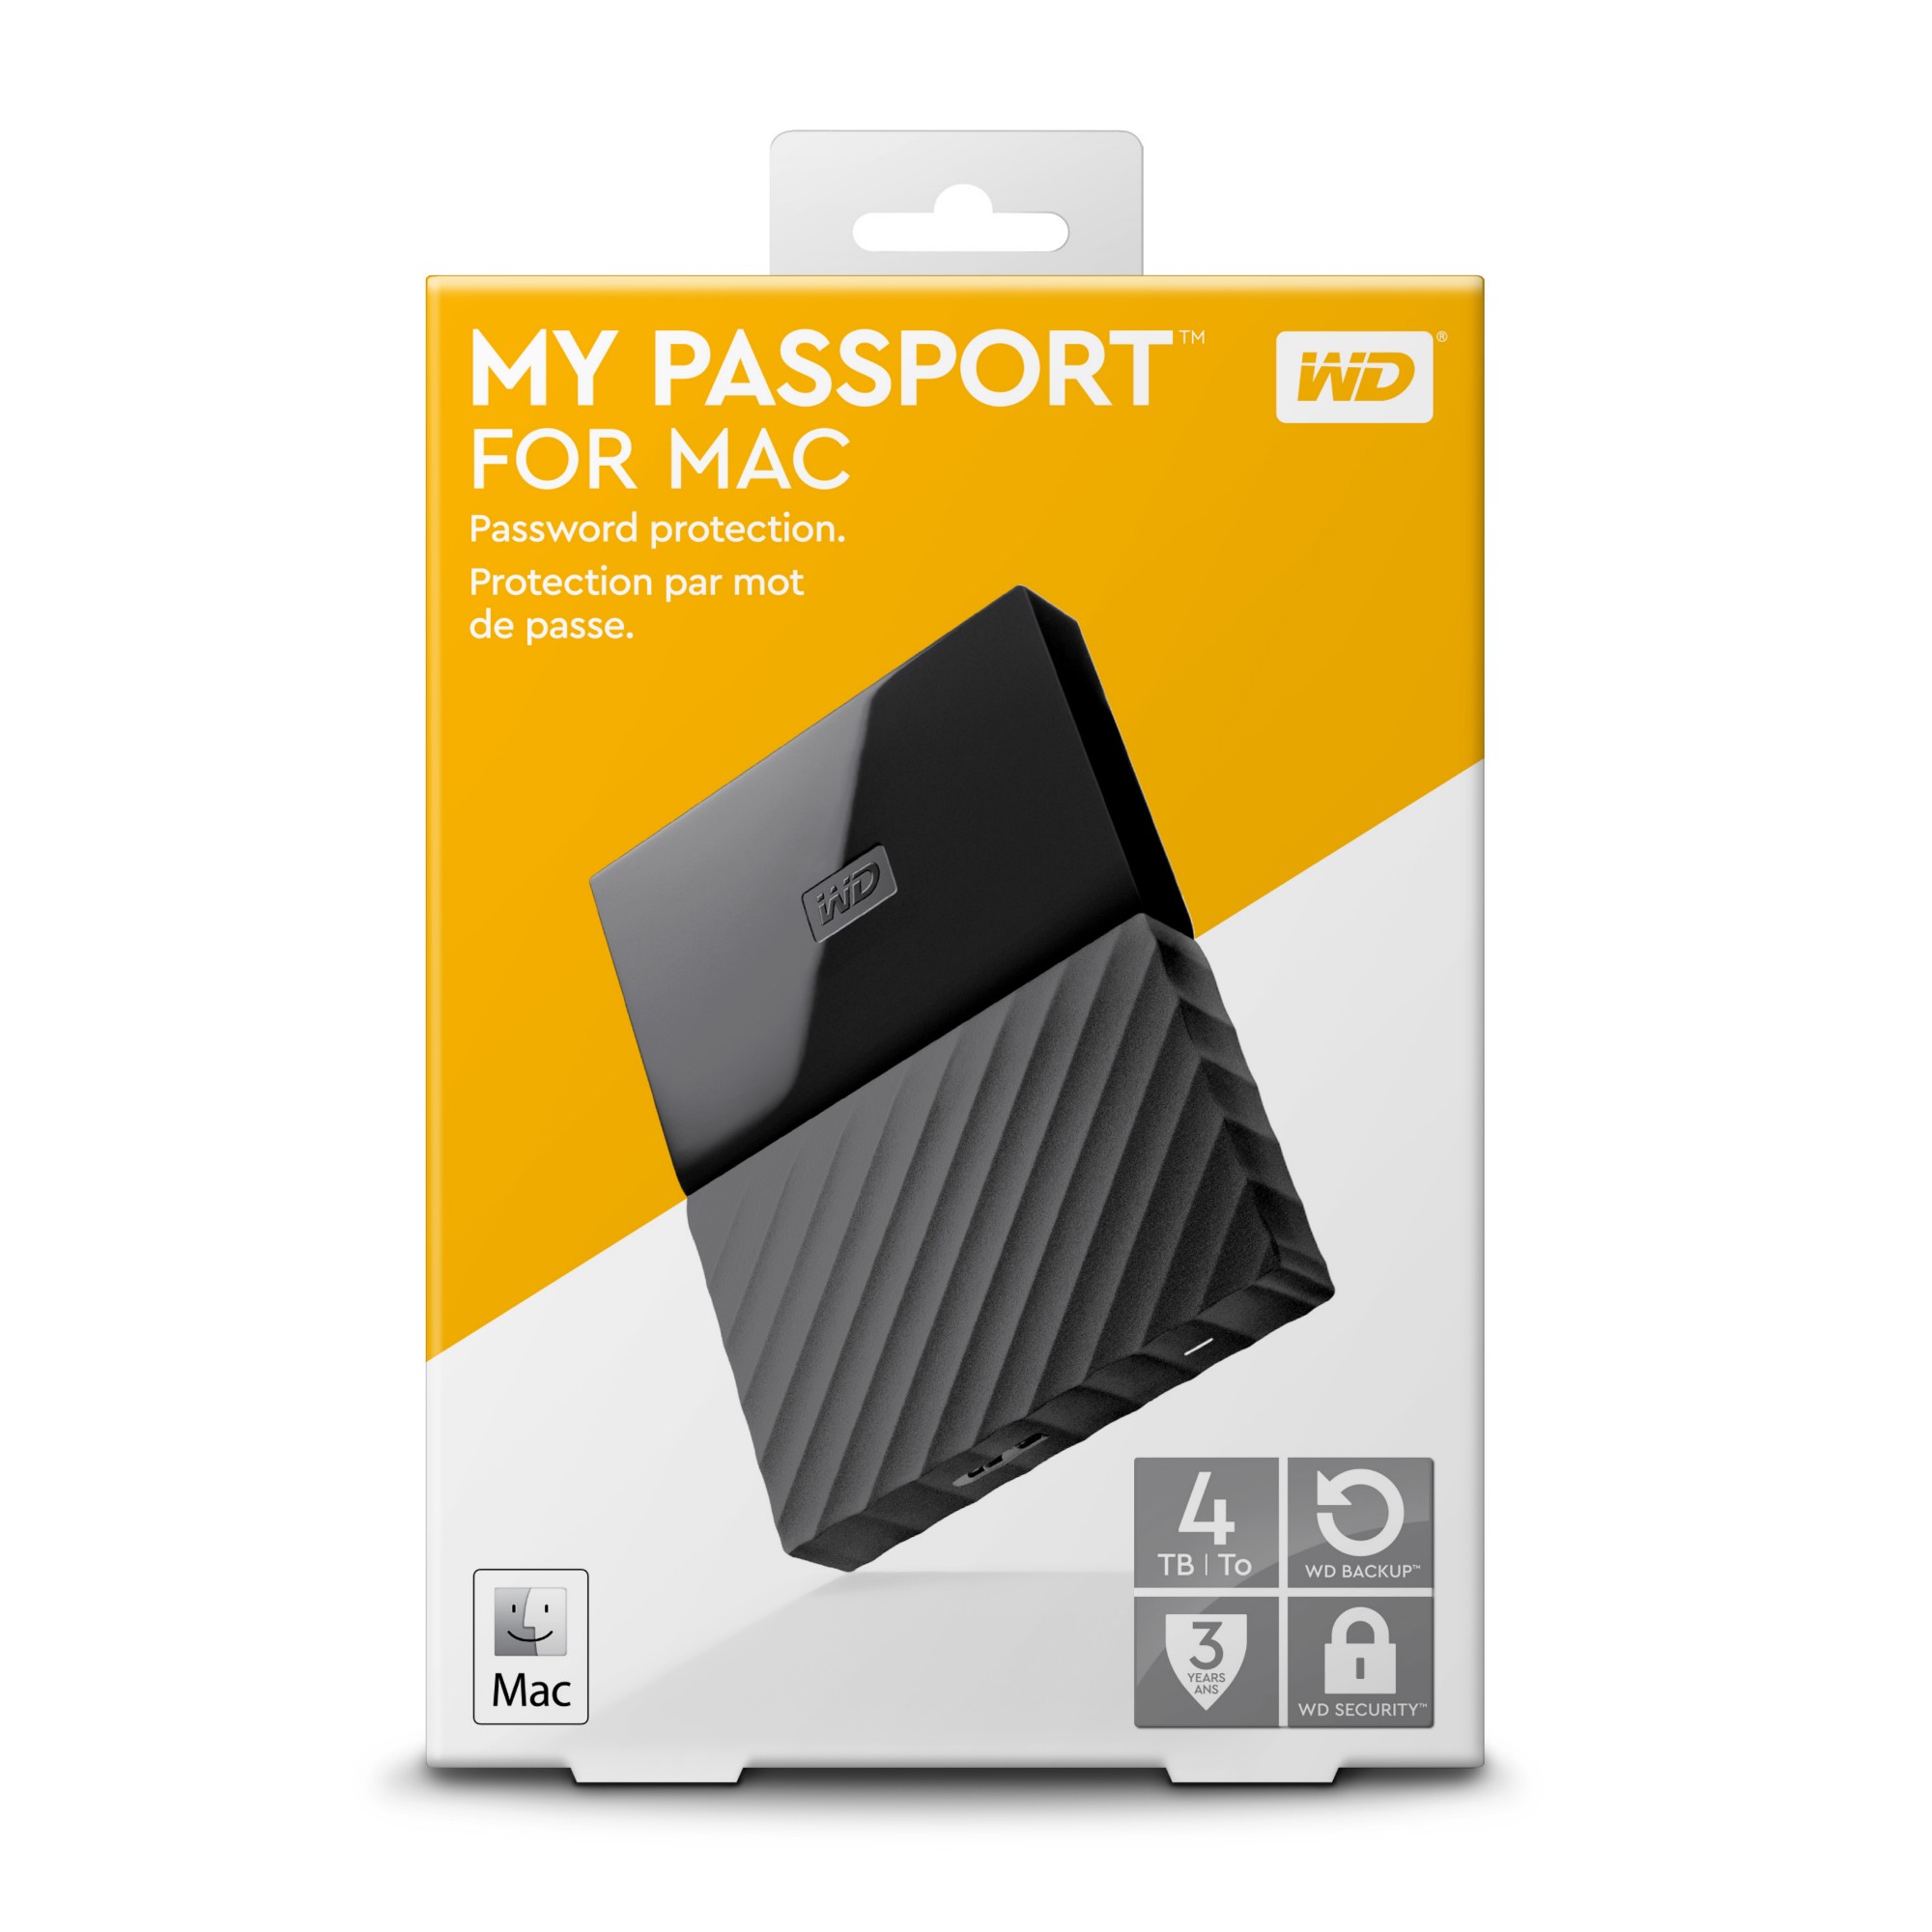 Wd my passport for mac software